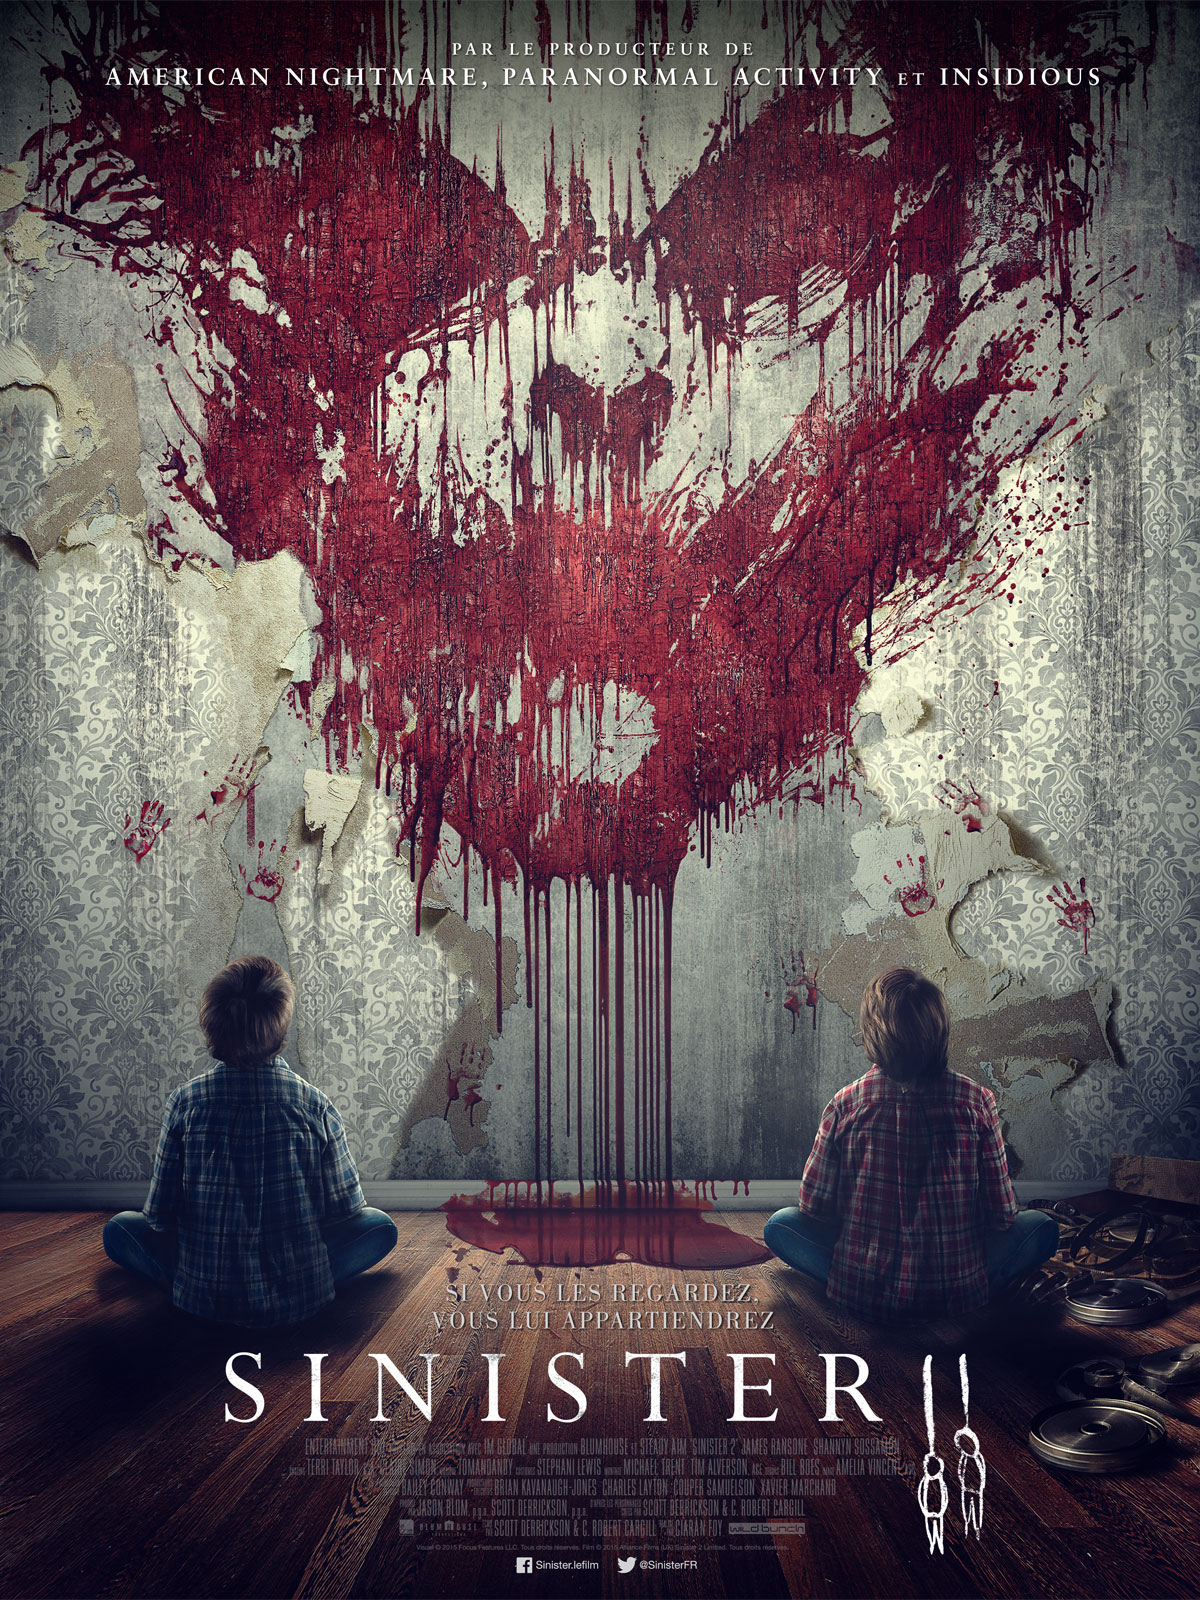 Sinister 2 TRUEFRENCH HDLight 1080p 2015